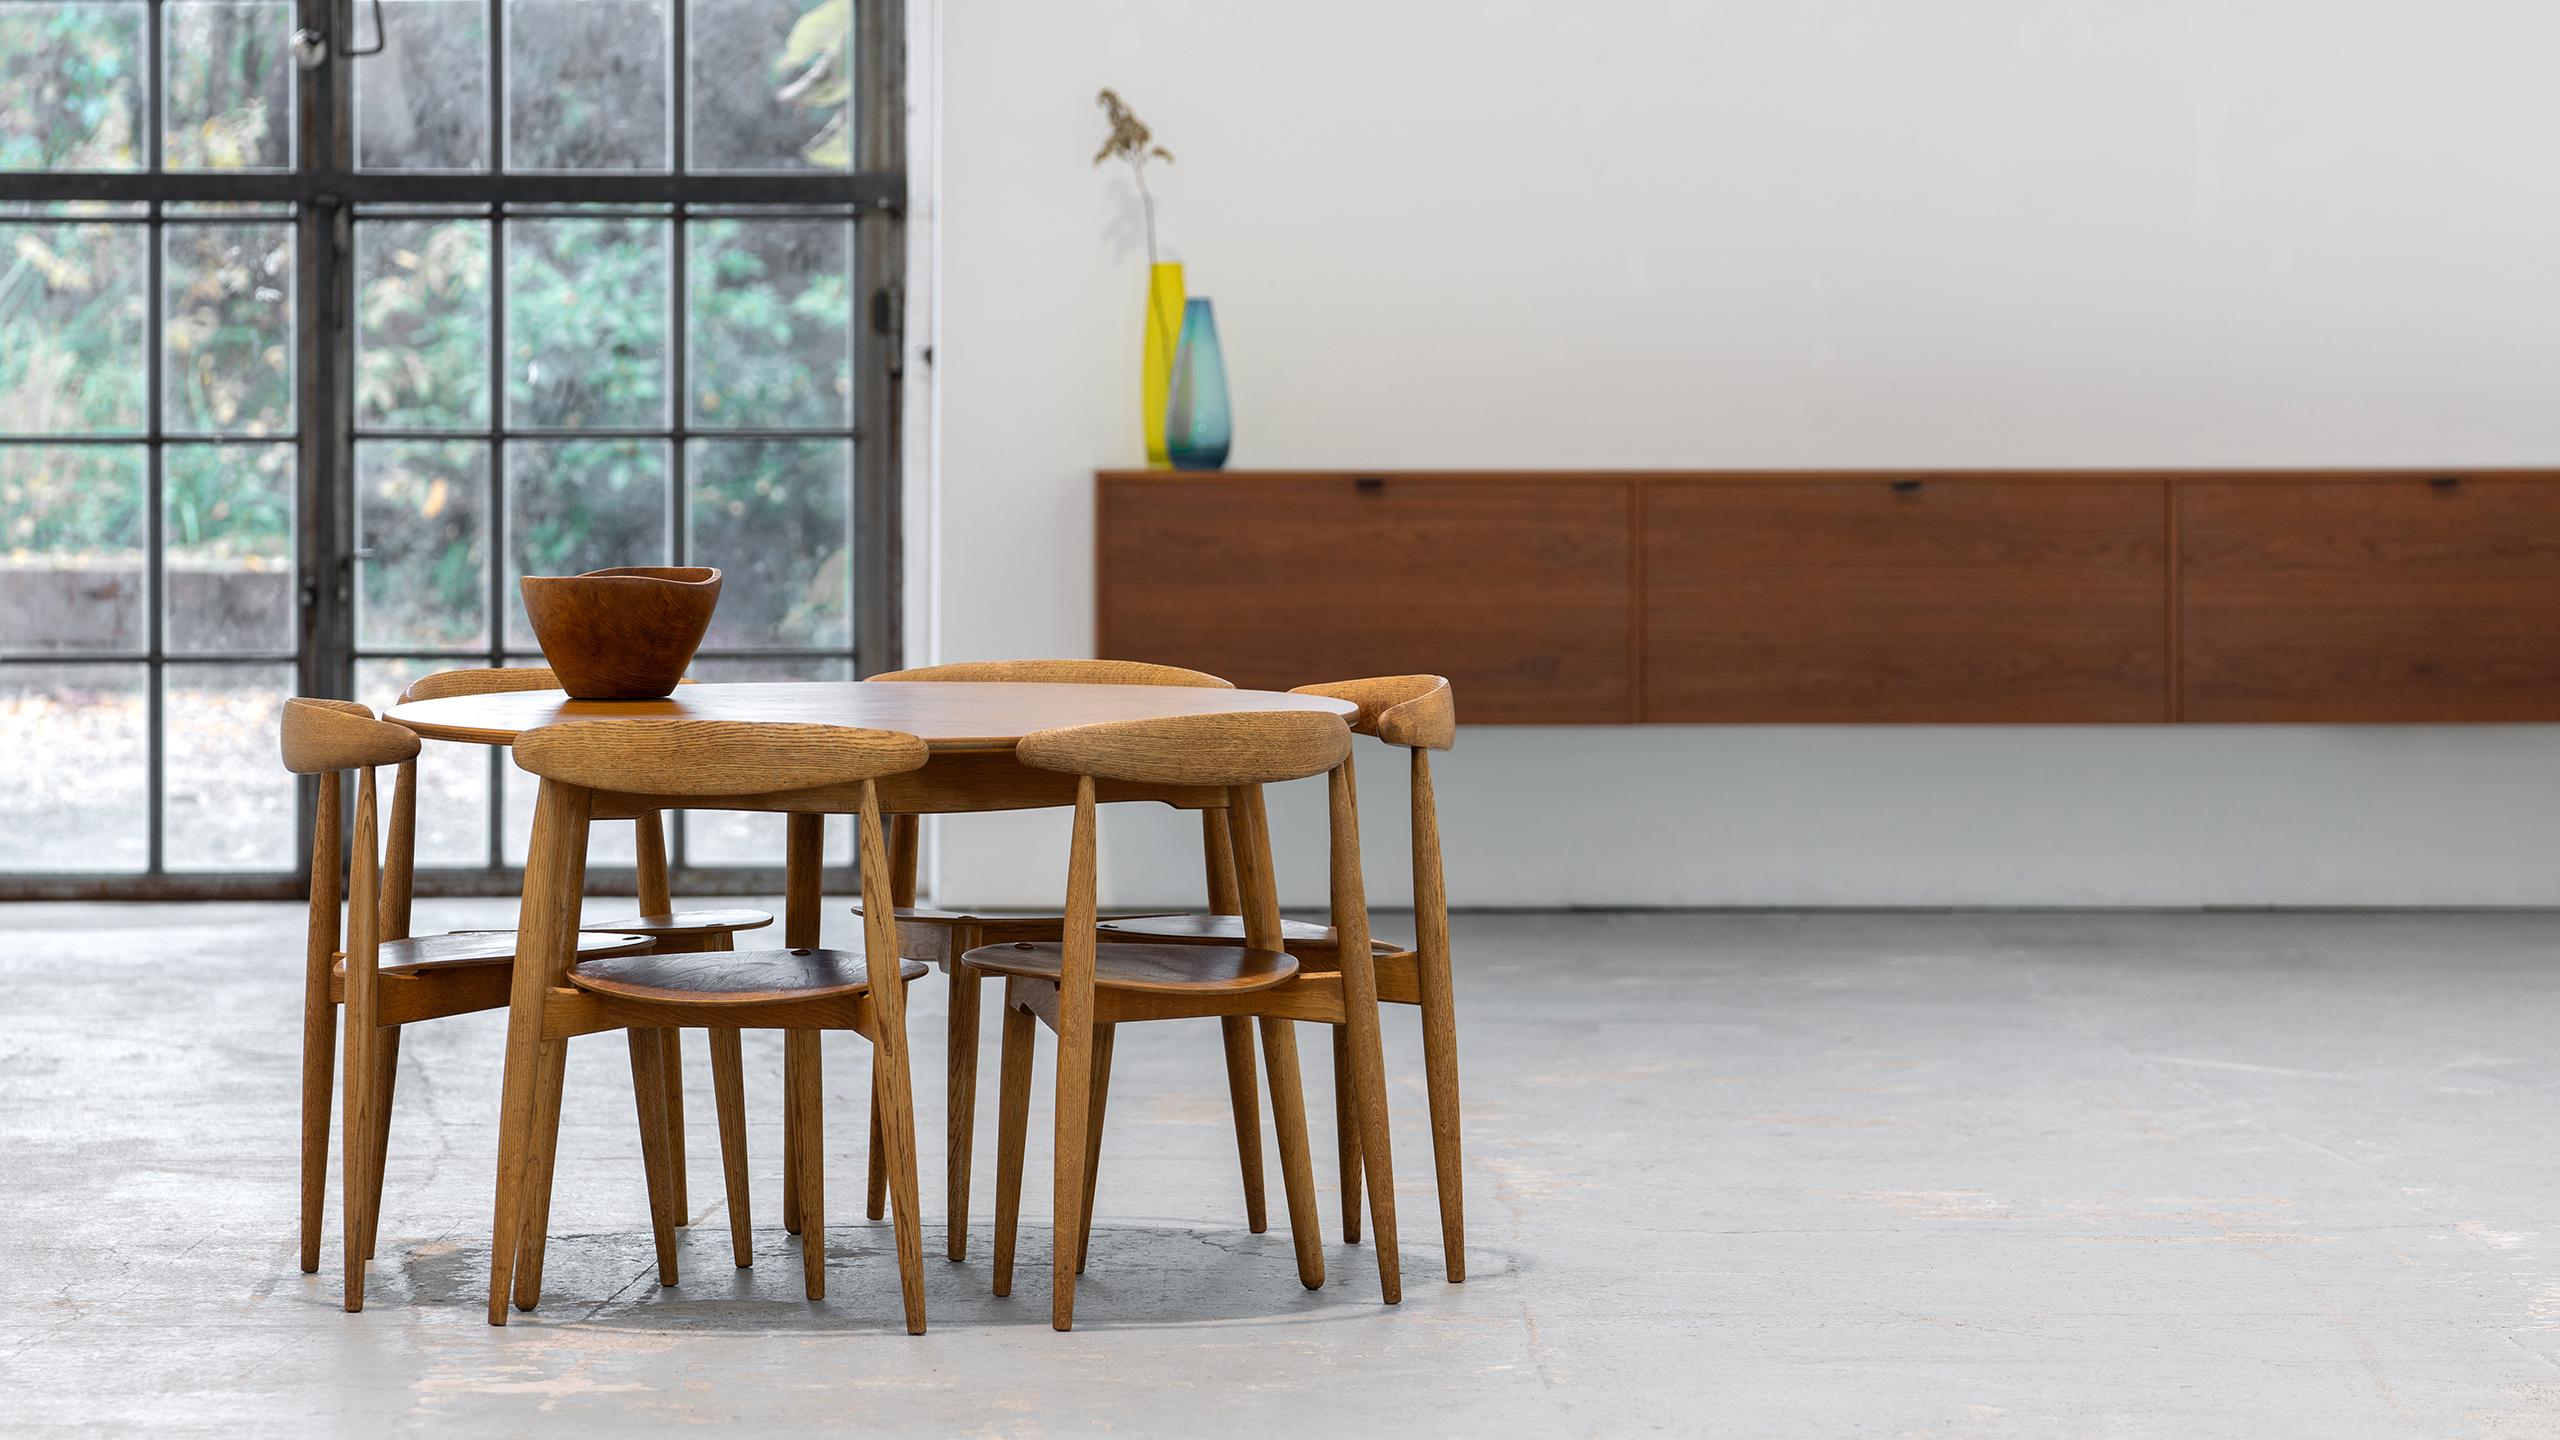 Insanely beautiful and inviting dining group by Hans J. Wegner for Fritz Hansen, Denmark in 1958. 
Consisting of a 3-legged table with 6 stackable 